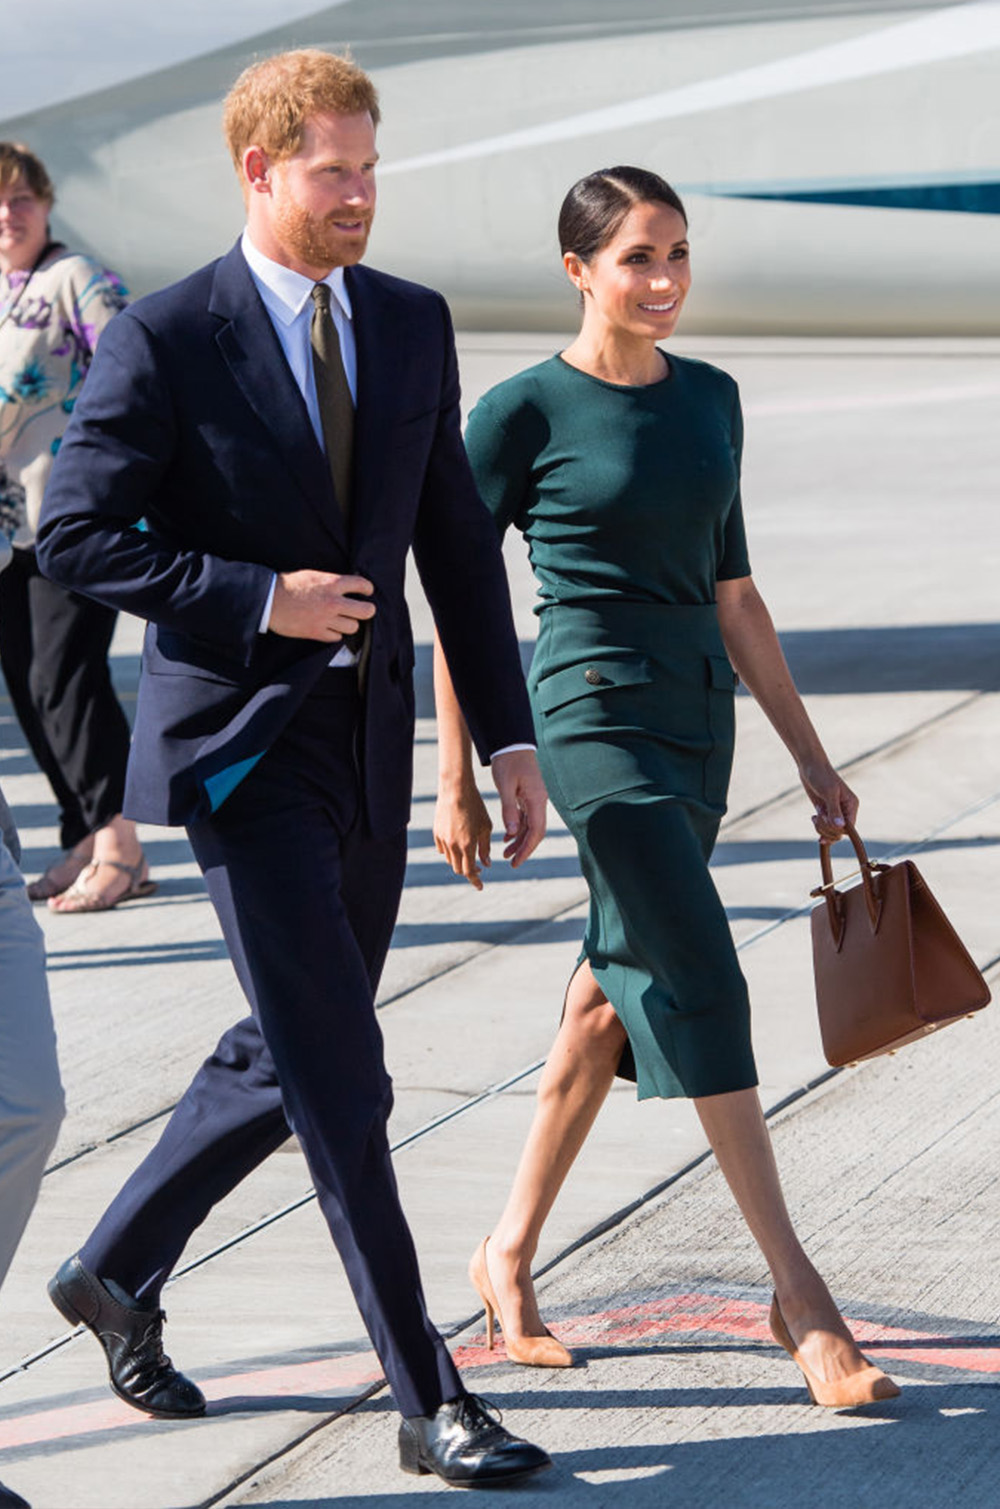 July 10, 2018: Prince Harry, Duke of Sussex and Meghan, Duchess of Sussex arrive at Dublin Airport. Meghan opts for an emerald green Givenchy number, fitting in both senses of the word given that Ireland is known as the Emerald Isle. A hue that sister-in-law Kate Middleton also frequents on the likes of St Patrick’s Day. Shoes, also by Givenchy, and bag by Strathberry complete this regal ensemble.